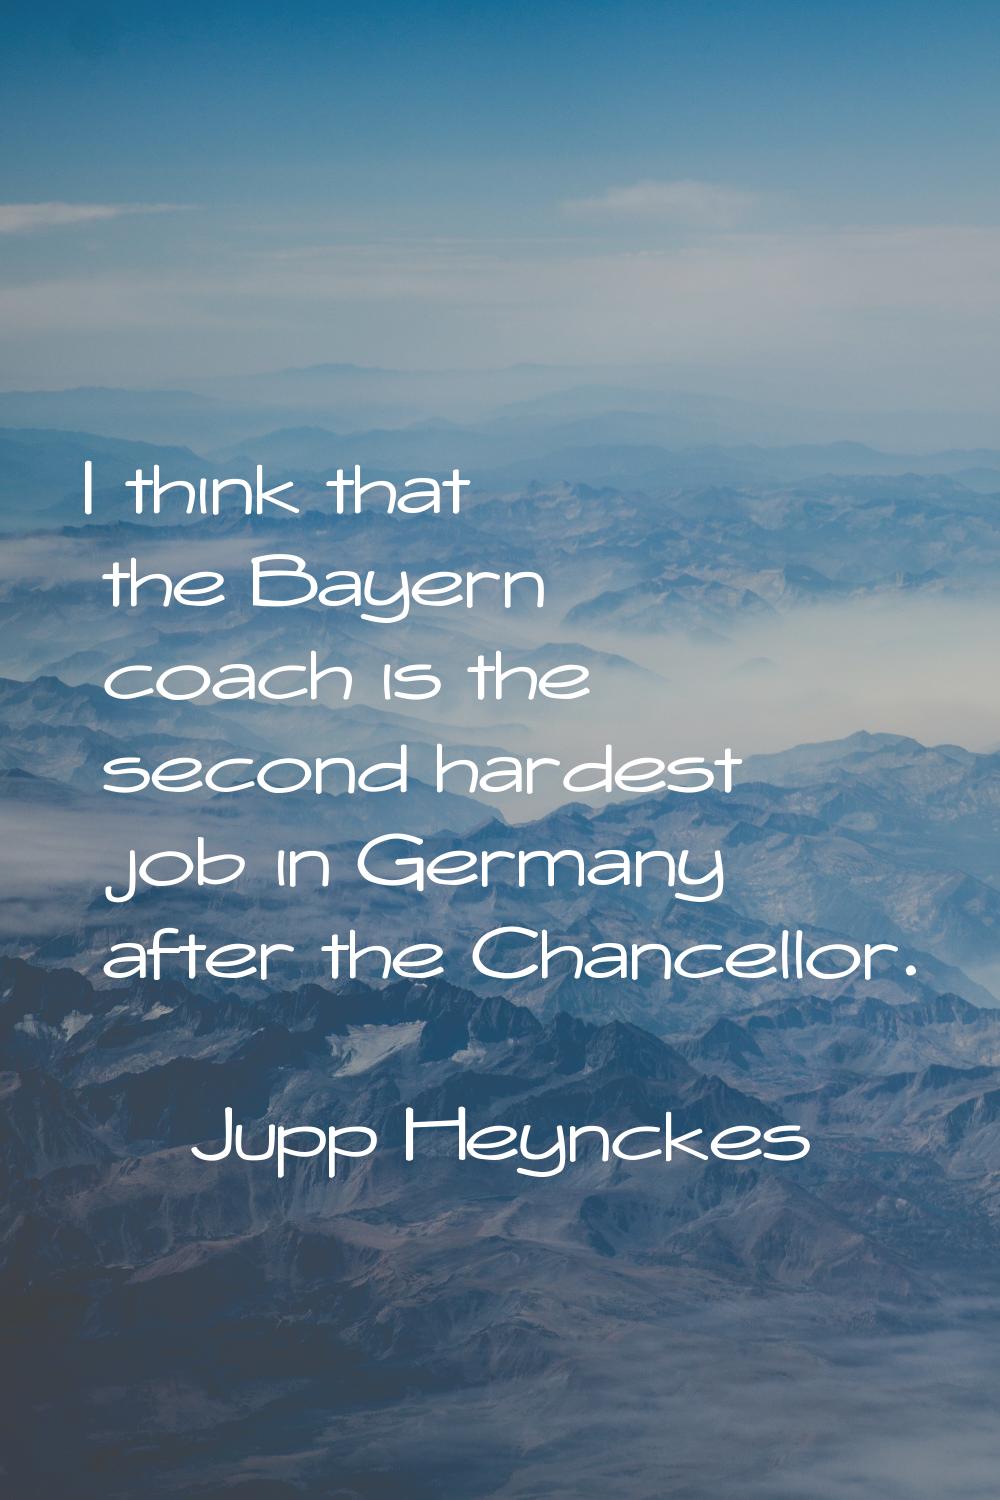 I think that the Bayern coach is the second hardest job in Germany after the Chancellor.